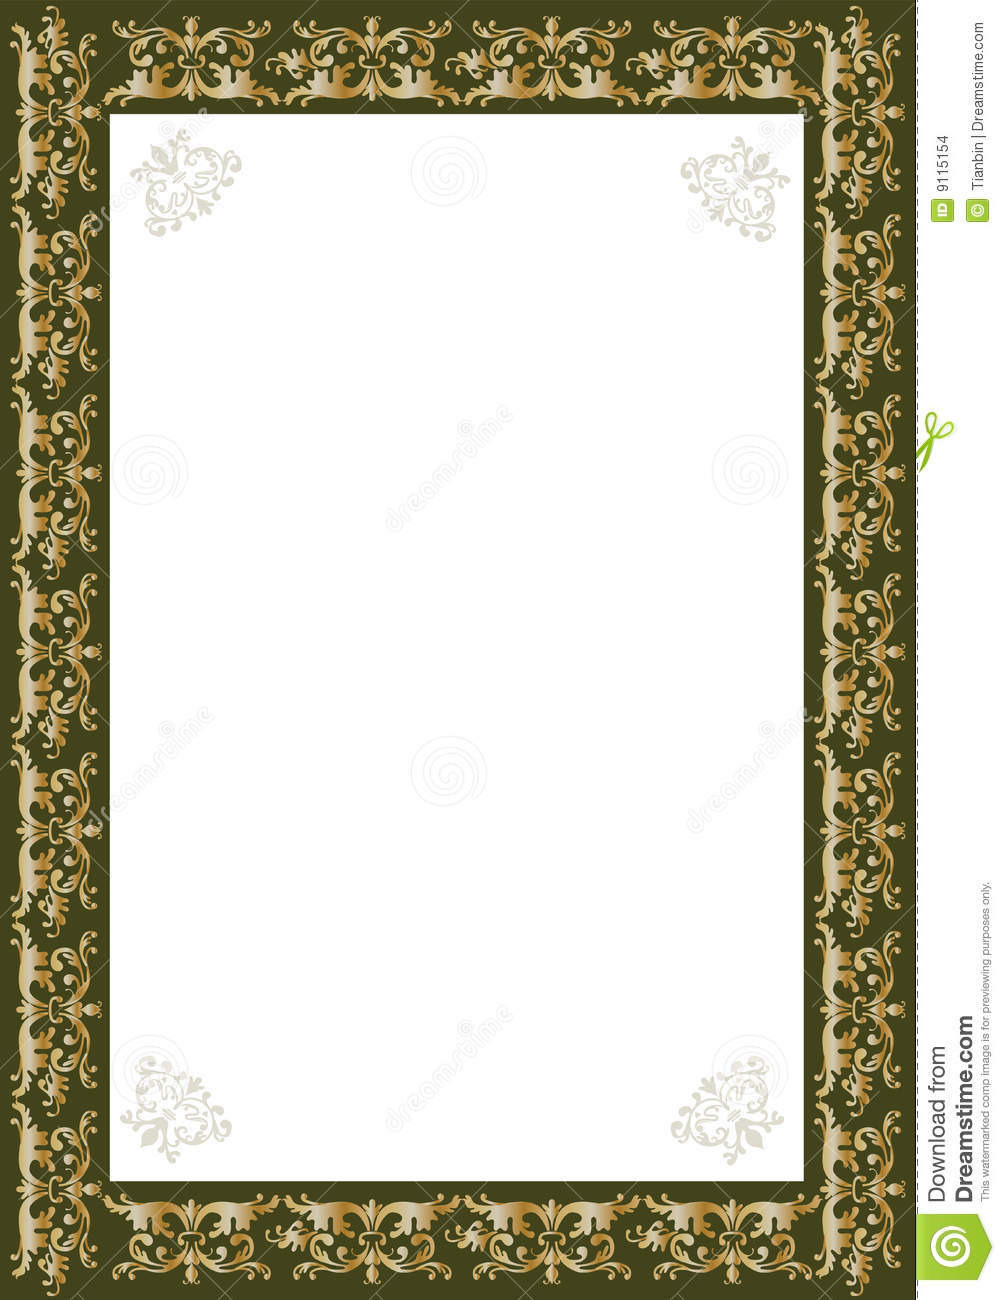 An Illustrated Gold Frame With A Classic Decorative Design